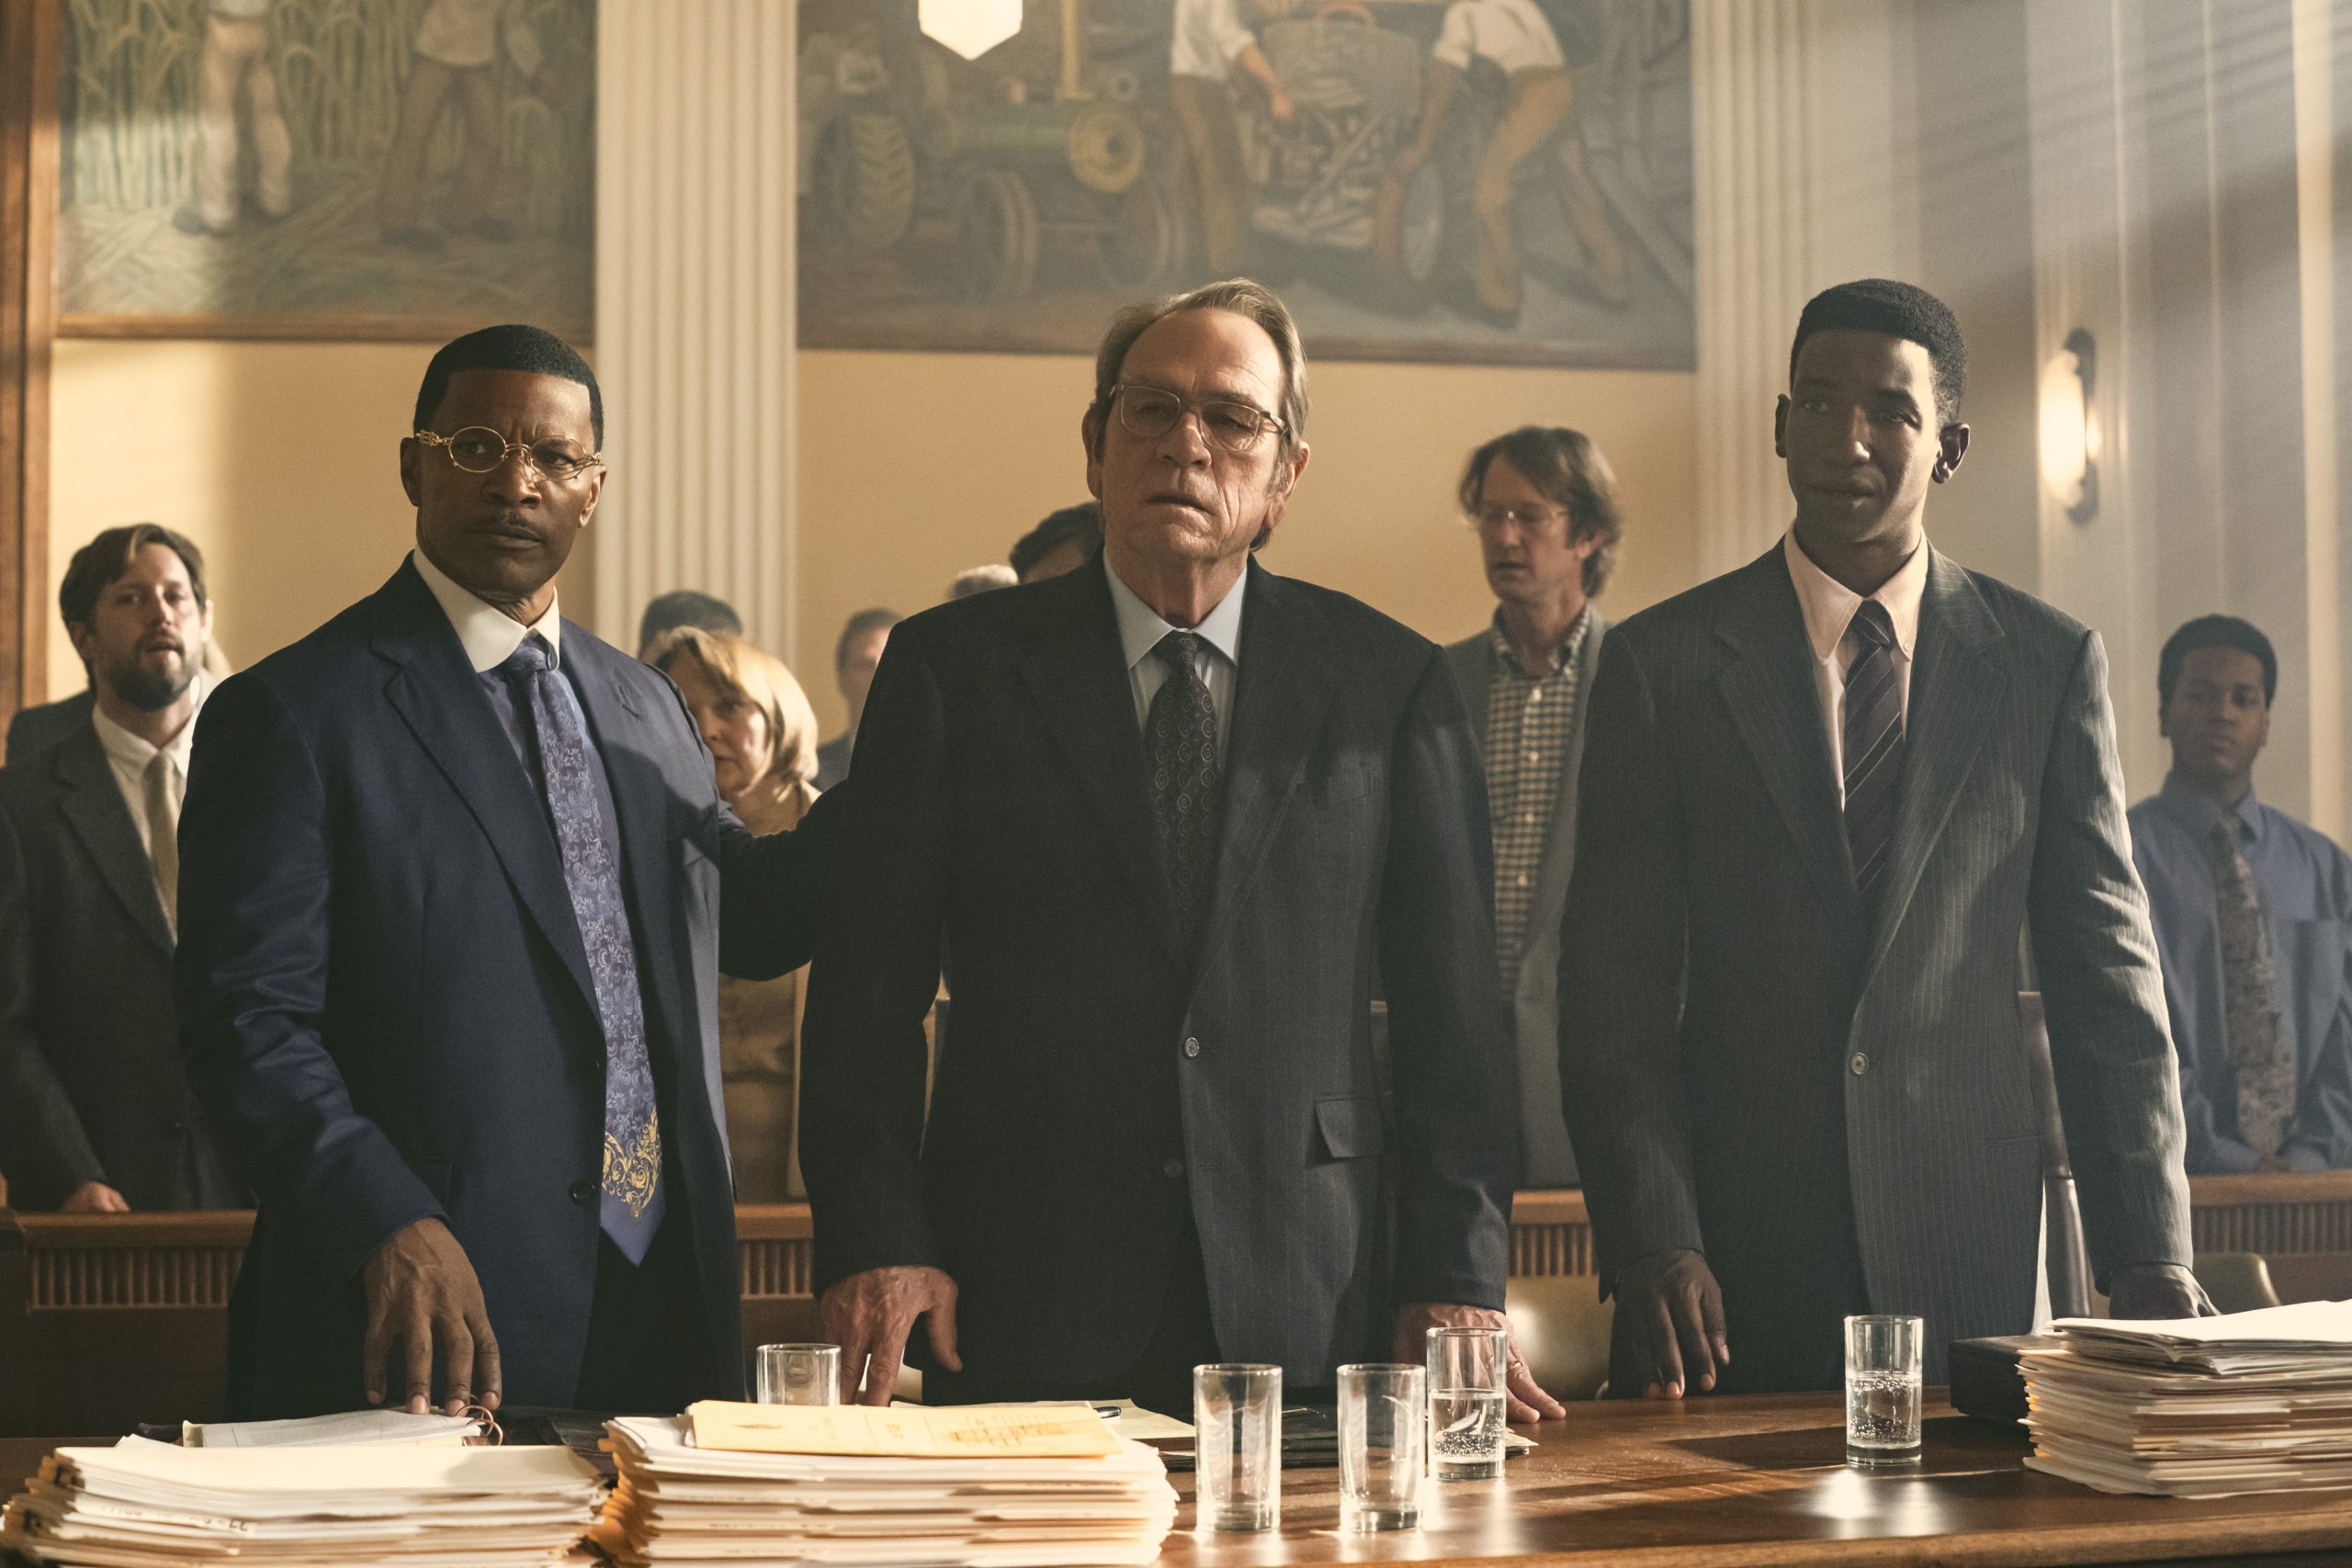 Jamie Foxx as Willie Gary, Pamela Reed as Annette O'Keefe, Tommy Lee Jones as Jeremiah O'Keefe, and Mamoudou Athie as Hal Dockins in The Burial Photo: Skip Bolen © AMAZON CONTENT SERVICES LLC